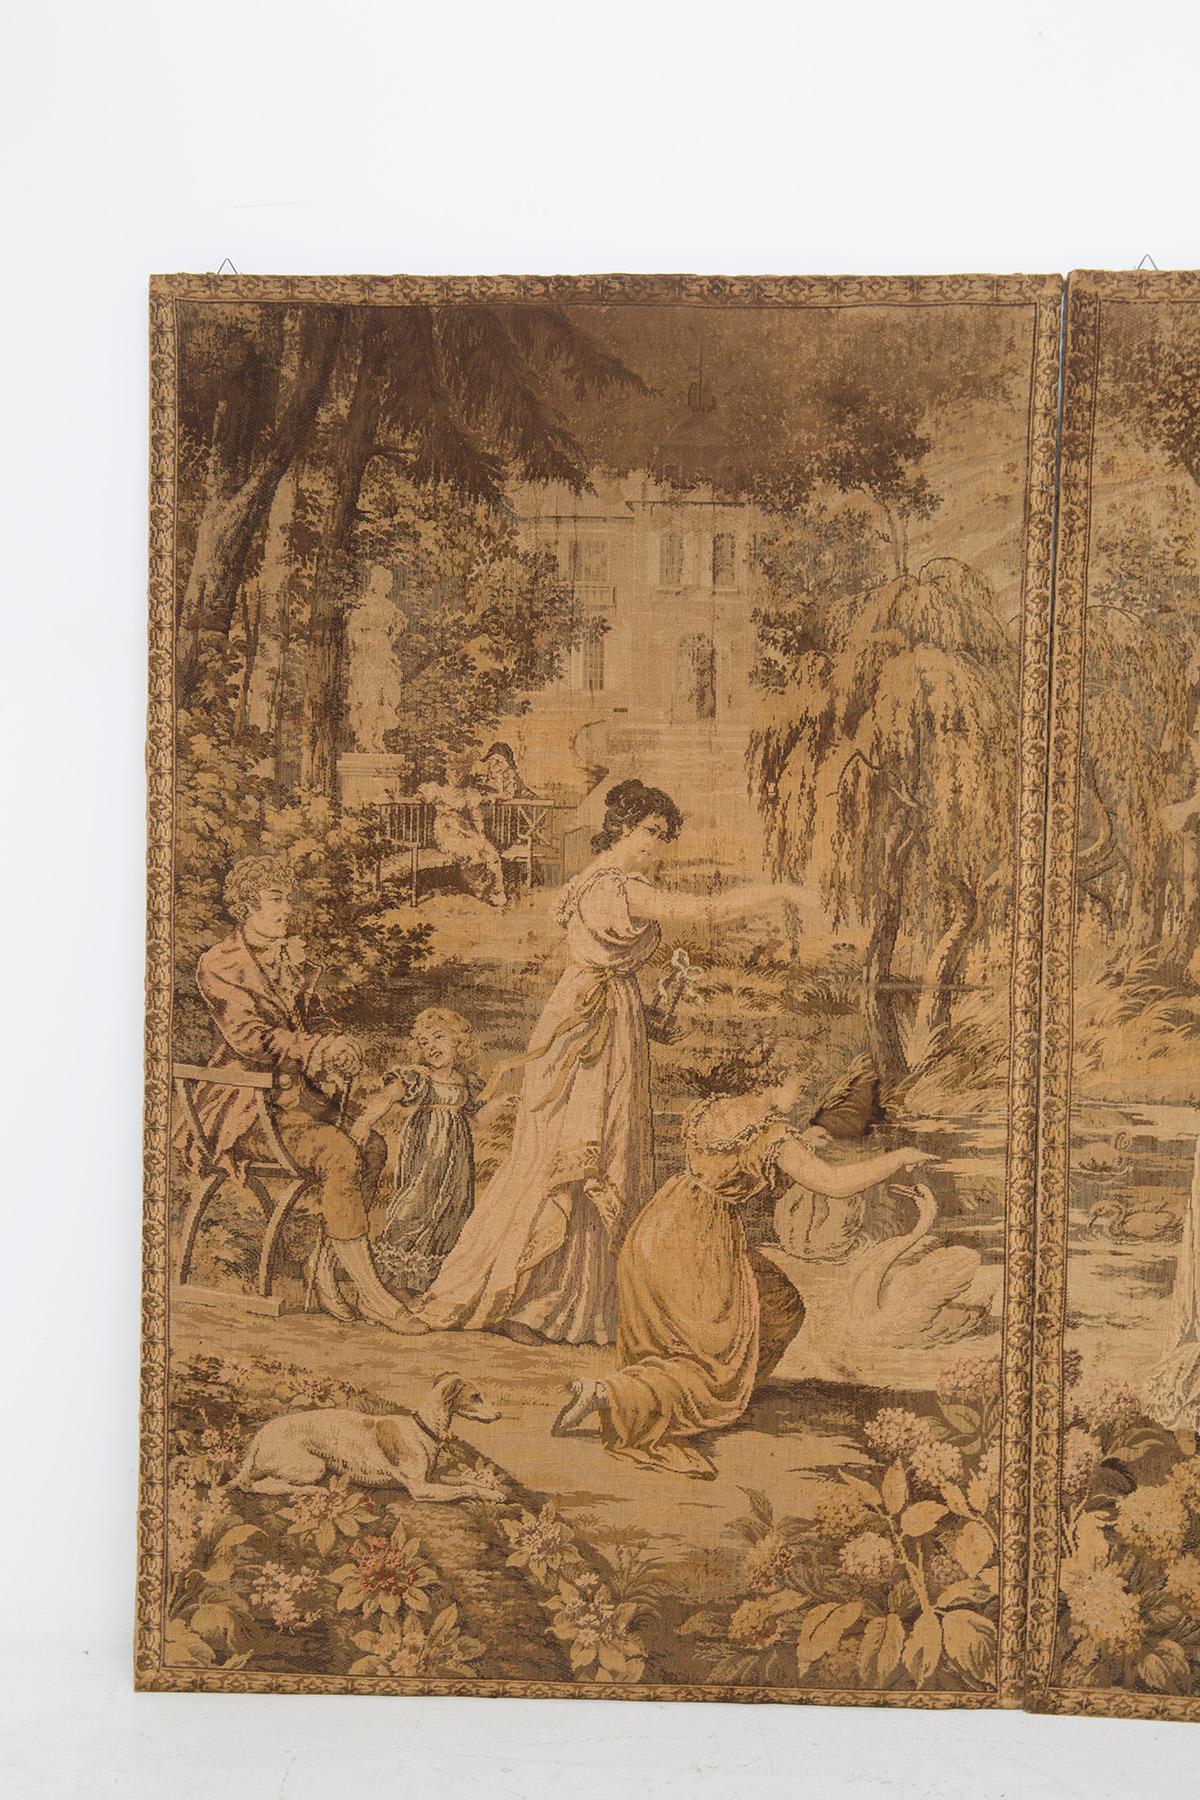 Splendid wall tapestry entirely hand-sewn, of fine Italian manufacture.
The antique tapestry belongs to the second half of the 20th century. Work depicting landscape with bourgeois characters in romantic style of good quality. Tapestry frame,